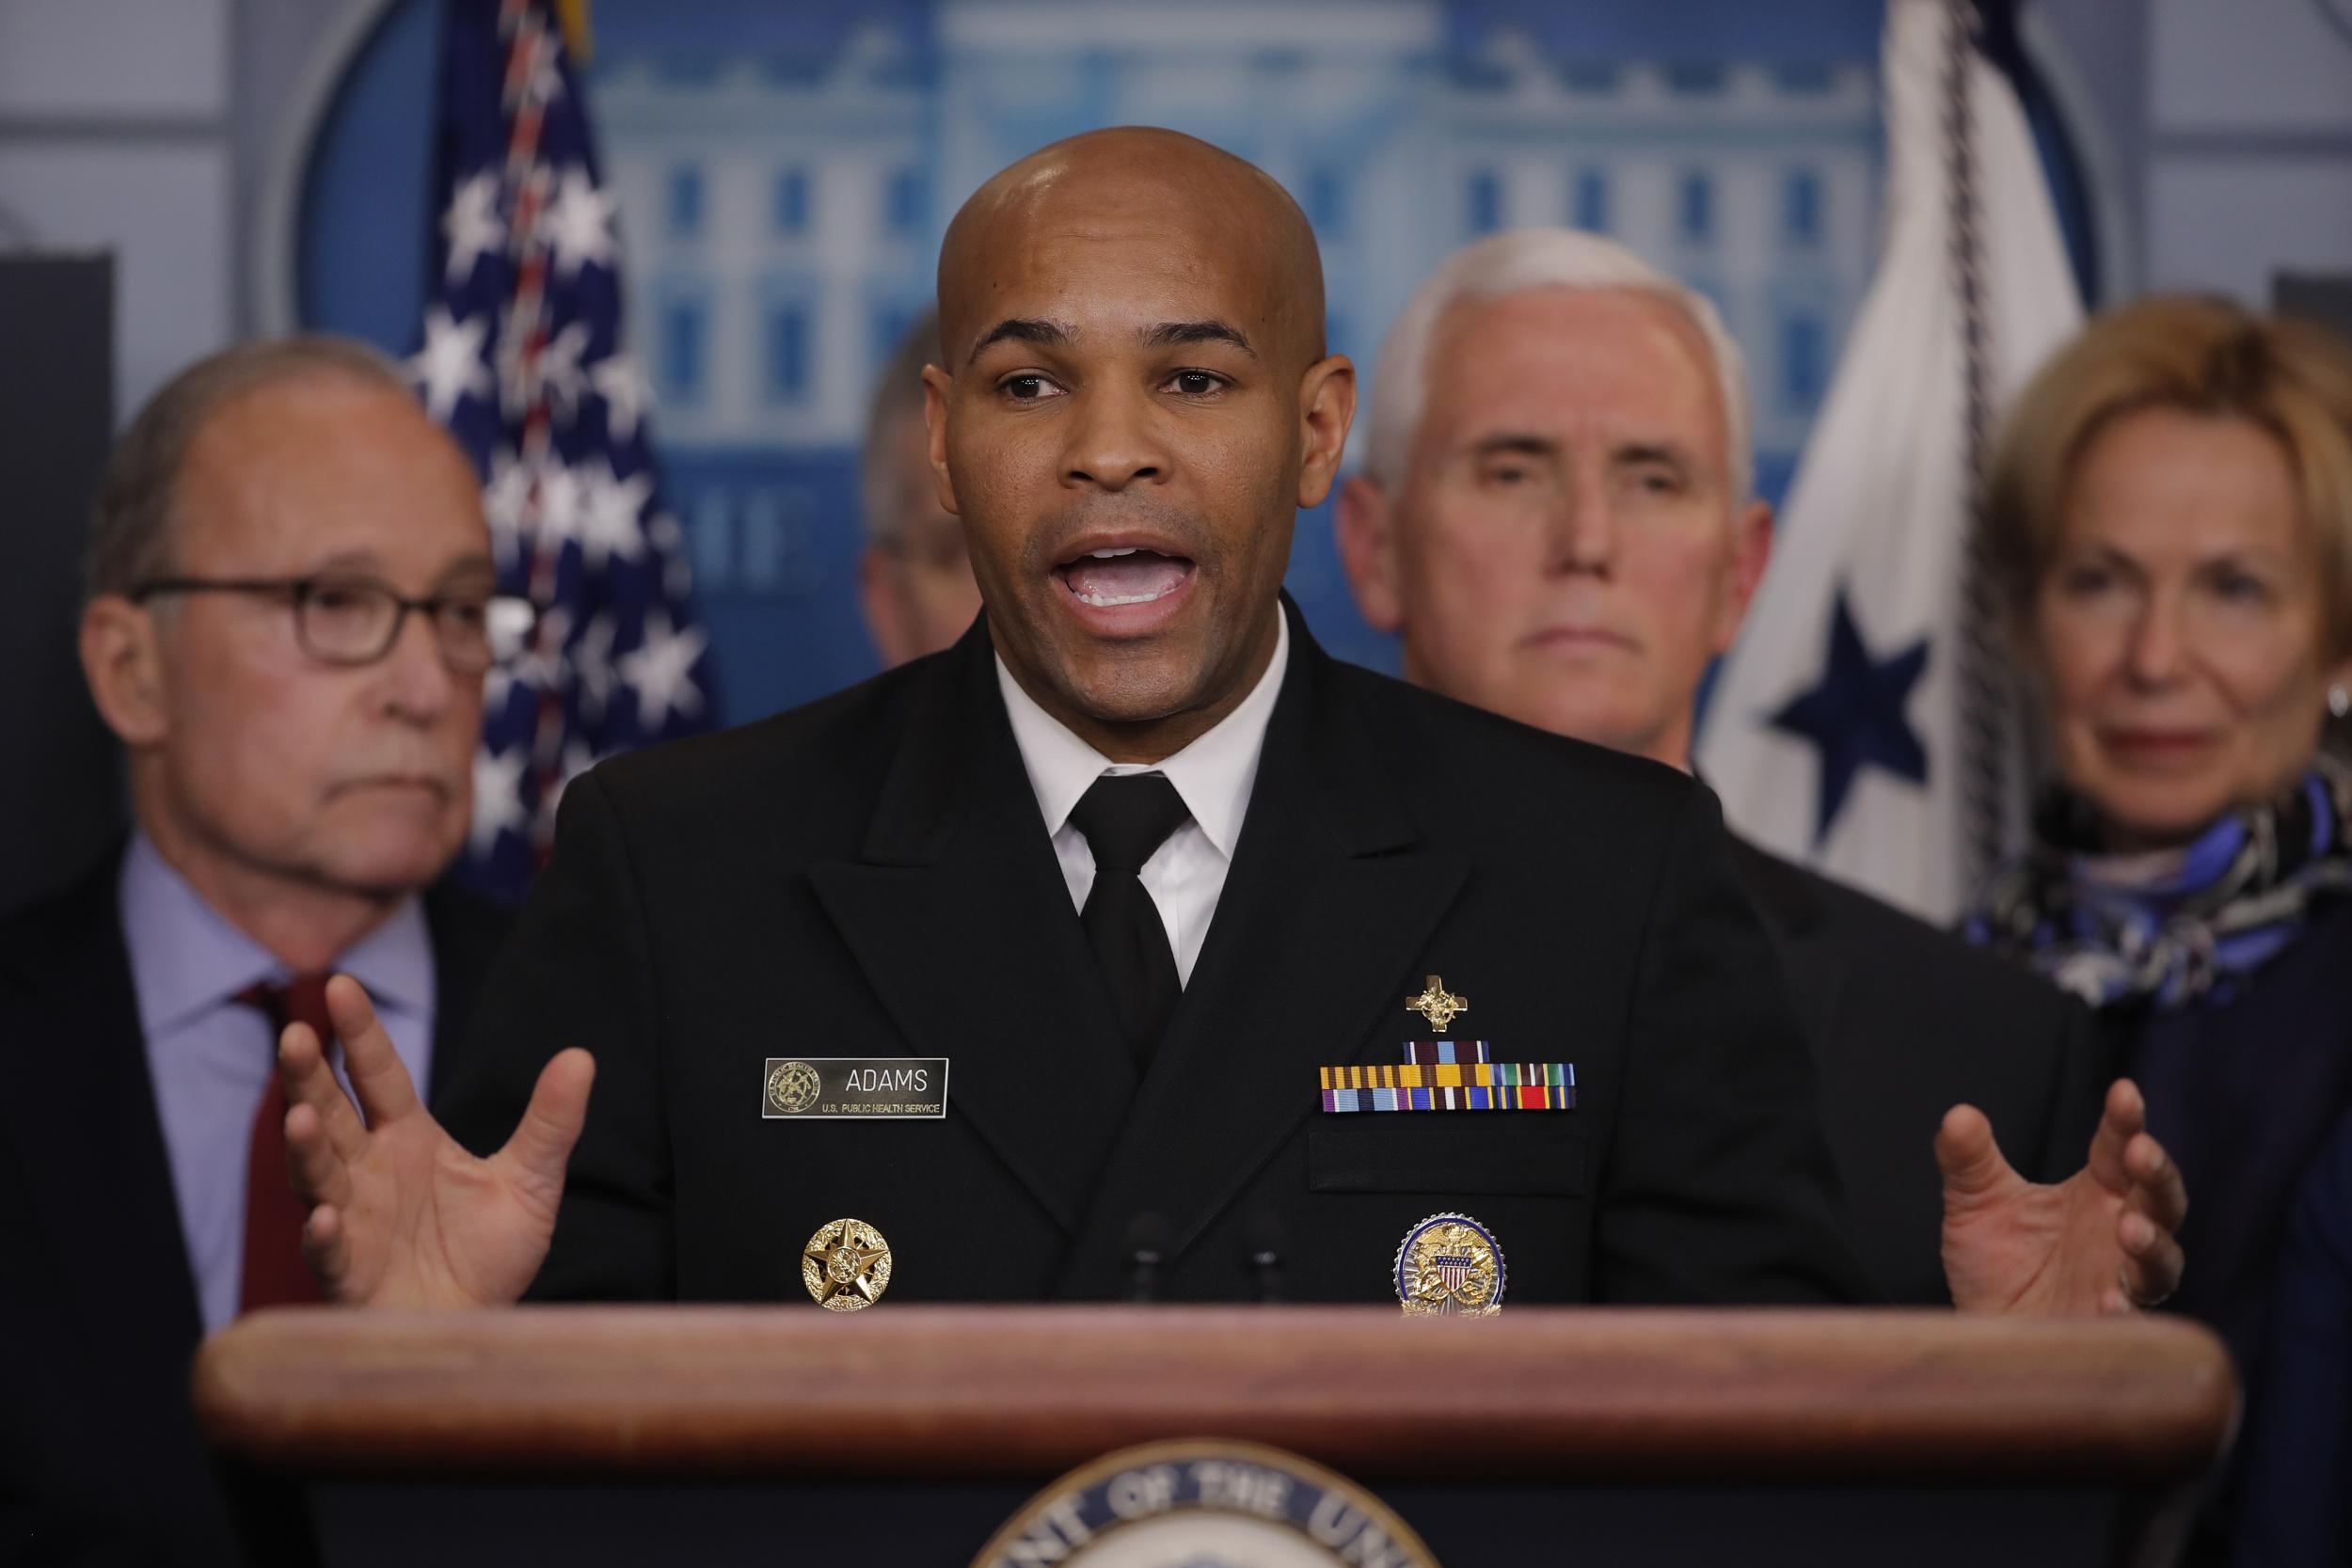 Coronavirus: Surgeon General admits he shouldn't have compared virus to the flu and says 'let's focus on the next 30 days not the last 30'